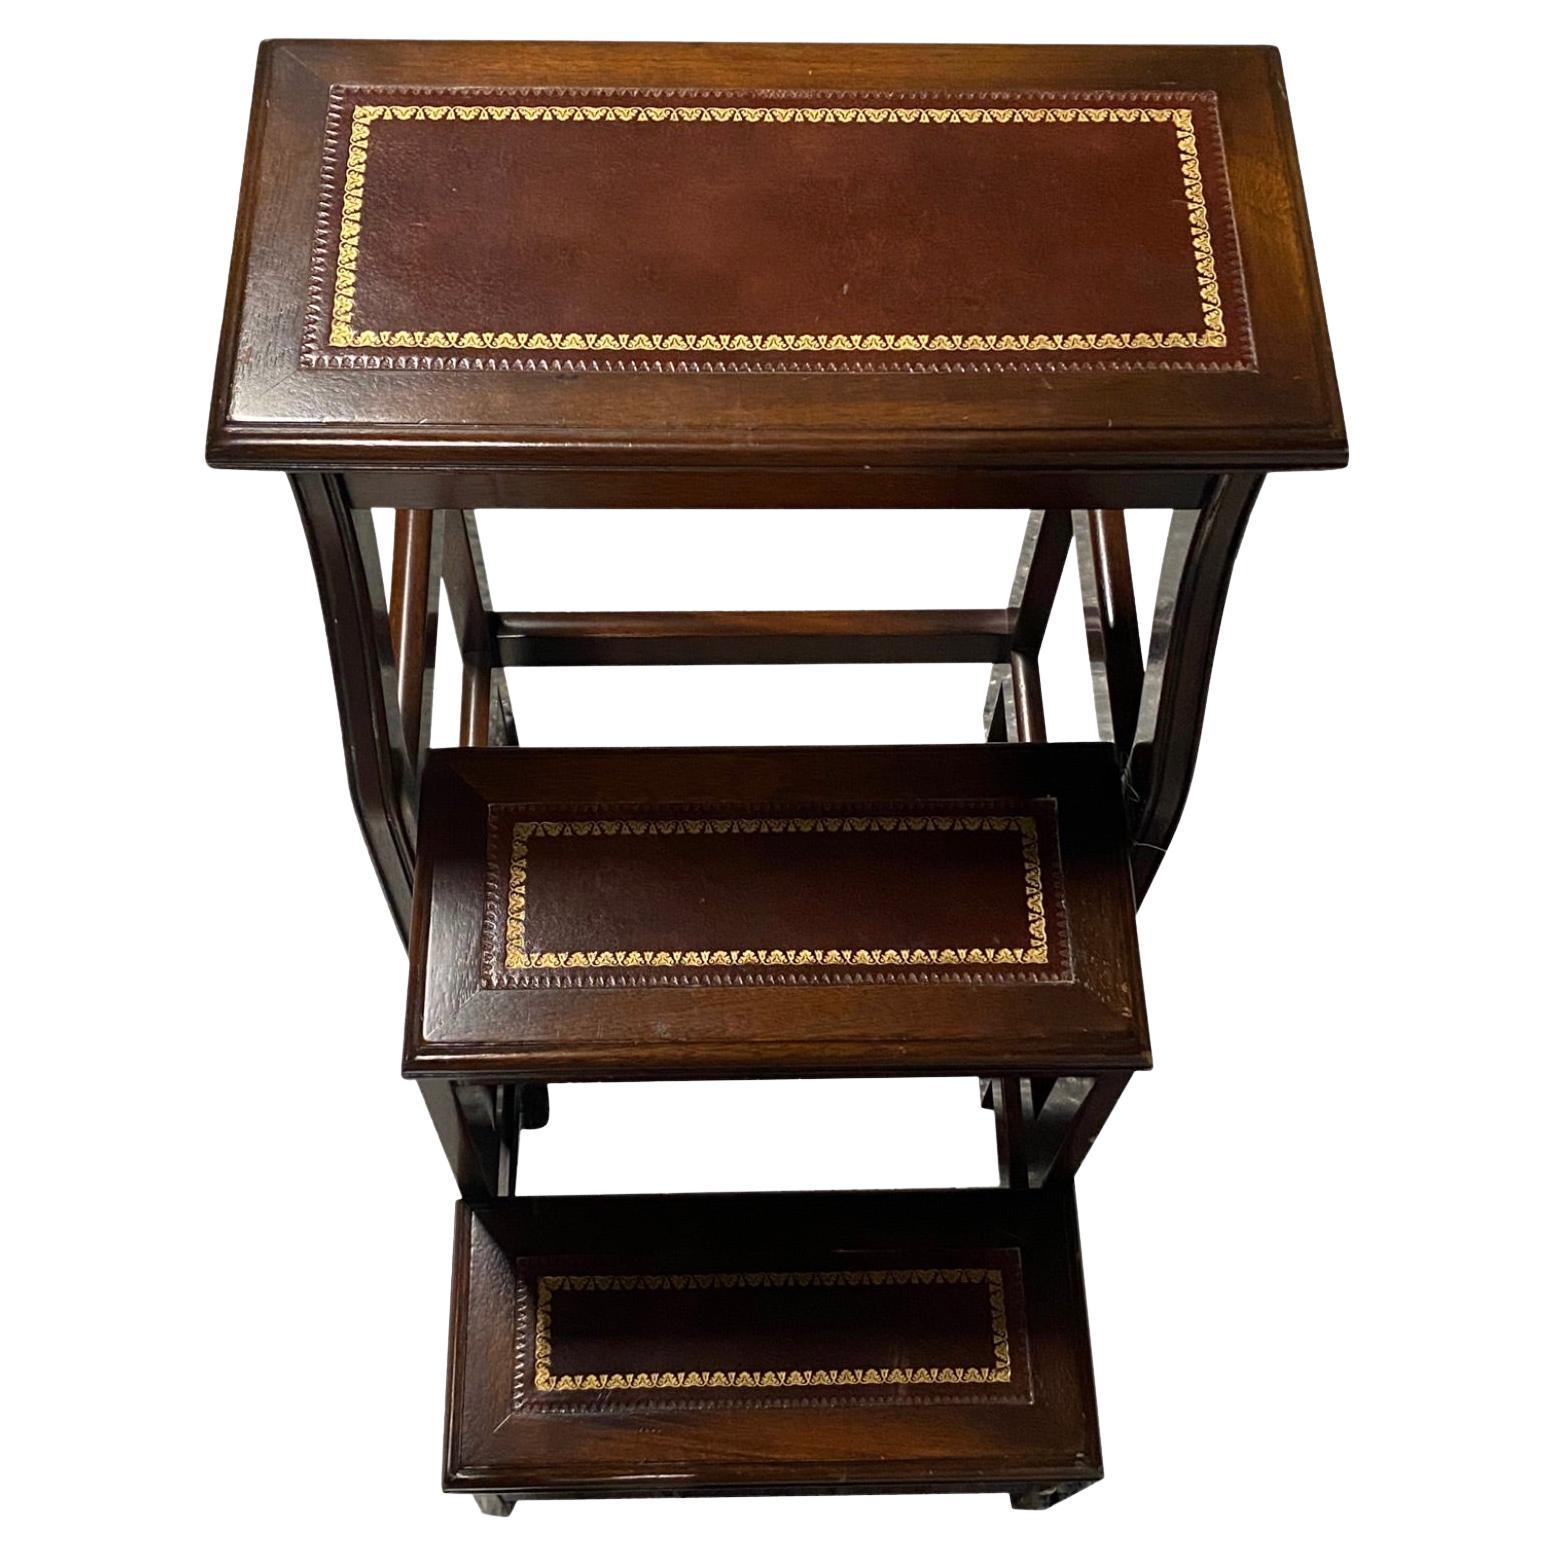 Smith & Watson English Regency Style Stepped Library Stool 